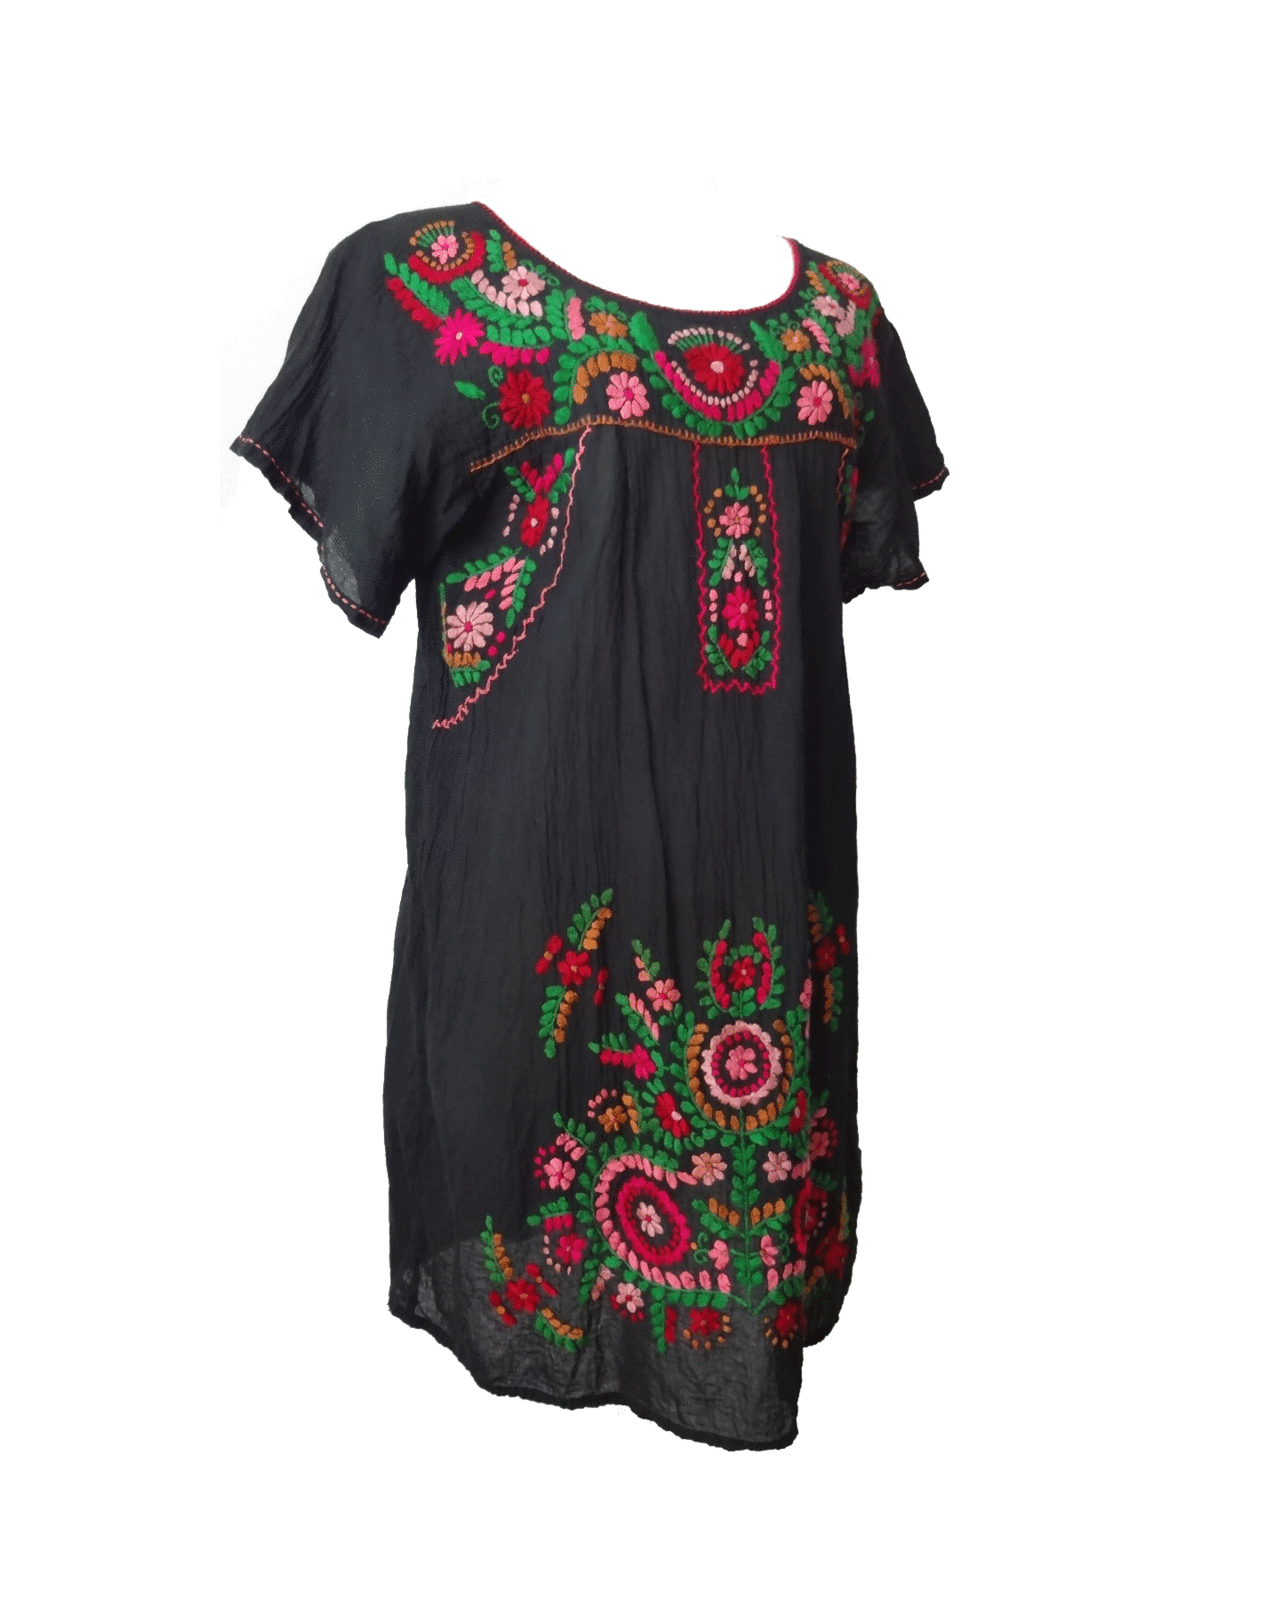 Hand Embroidered Mexican Cotton Dress, Mexican Peasant Dress - Dresses